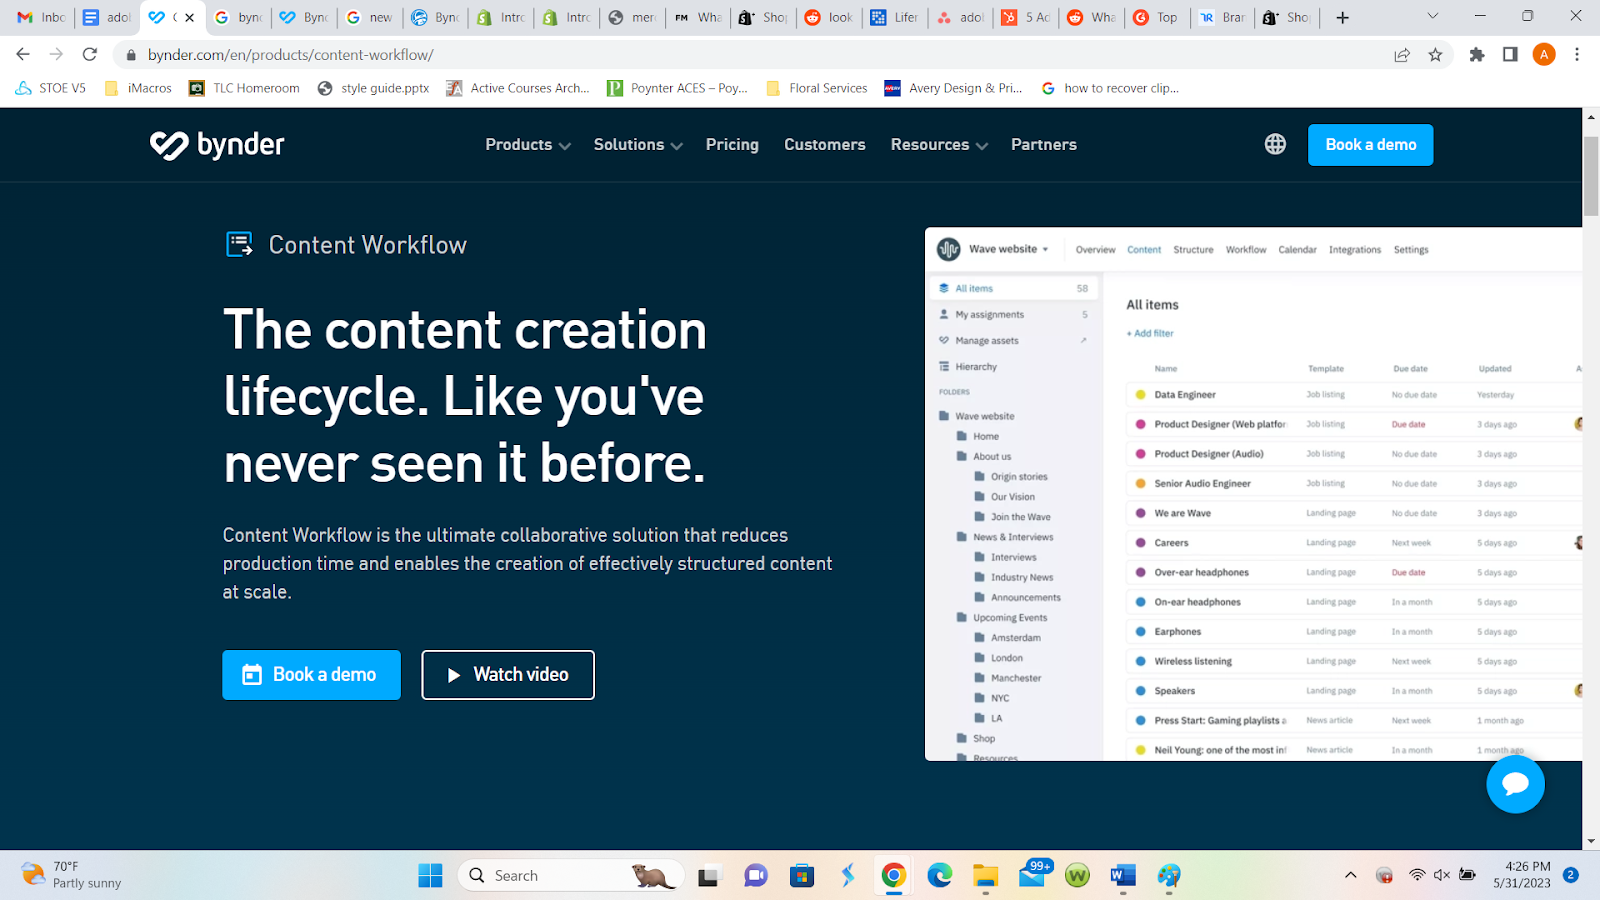 adobe experience manager alternatives, bynder content workflow interface